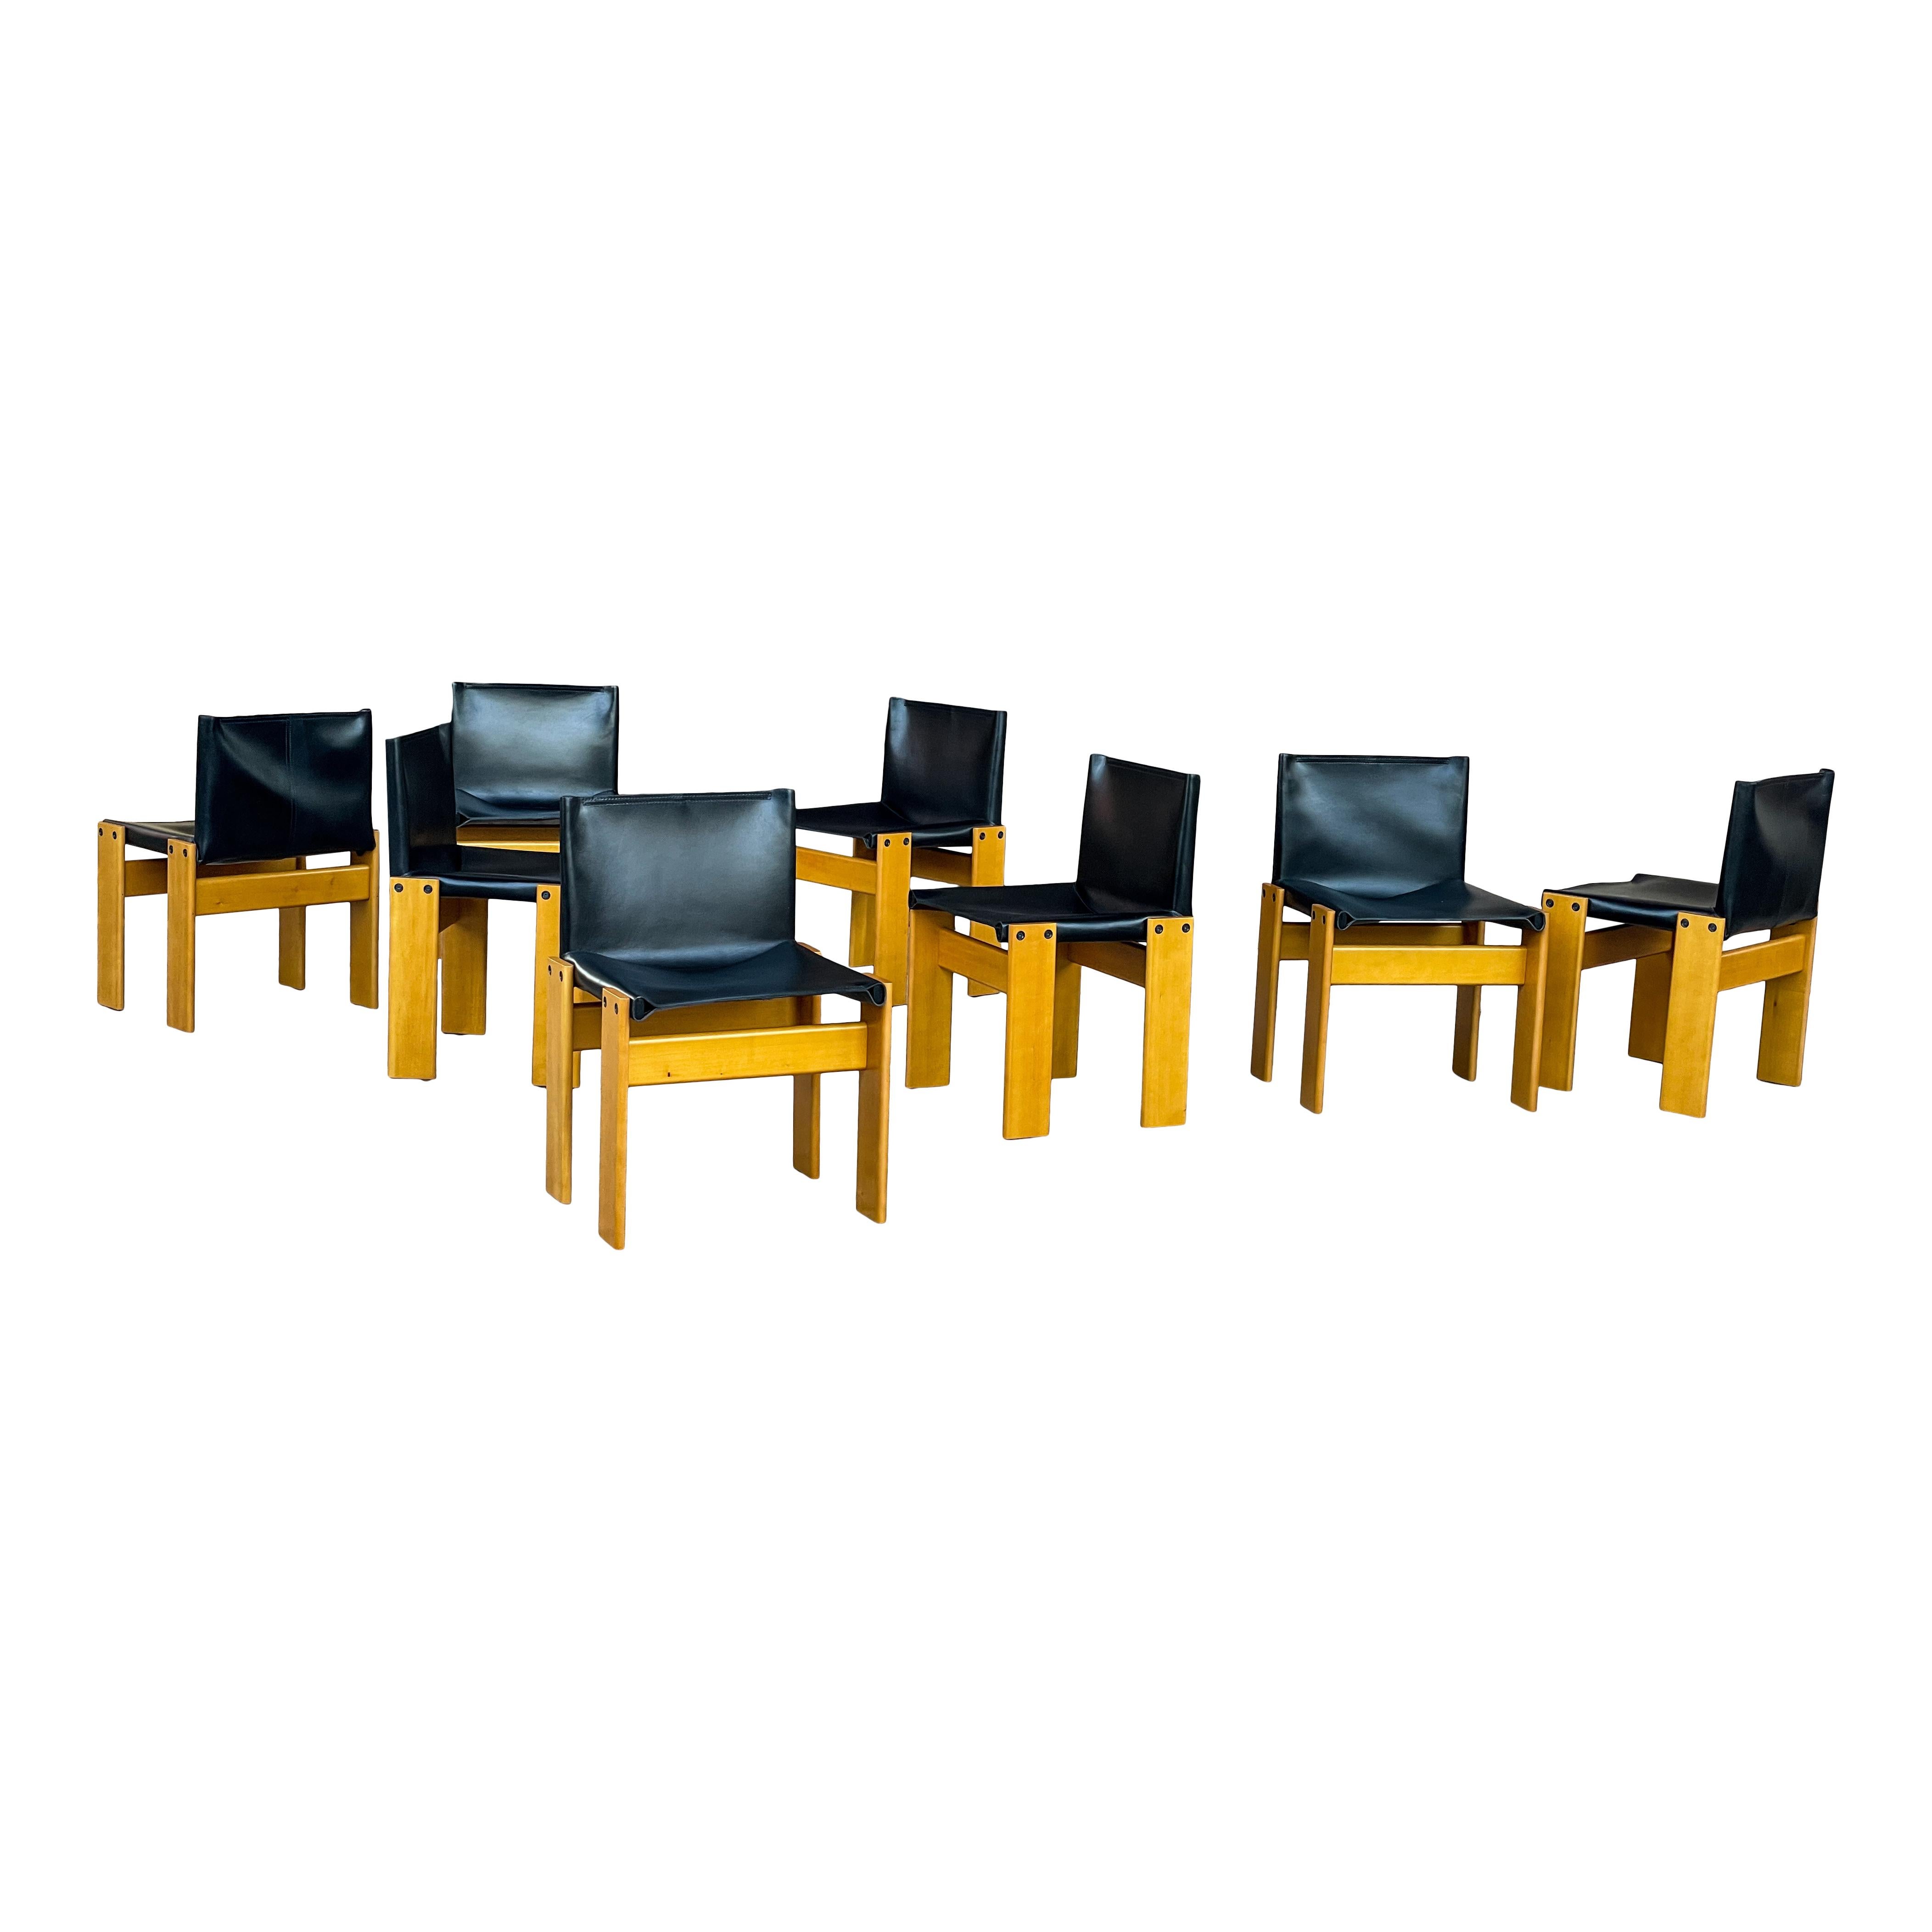 Set of fourteen “Monk” dining chairs designed by Afra and Tobia Scarpa for Molteni in 1973.
Made of black leather and ash wood.
Fully restored in Italy.

Interesting is the ‘flat’ shape of this chair where the designer has chosen to place the